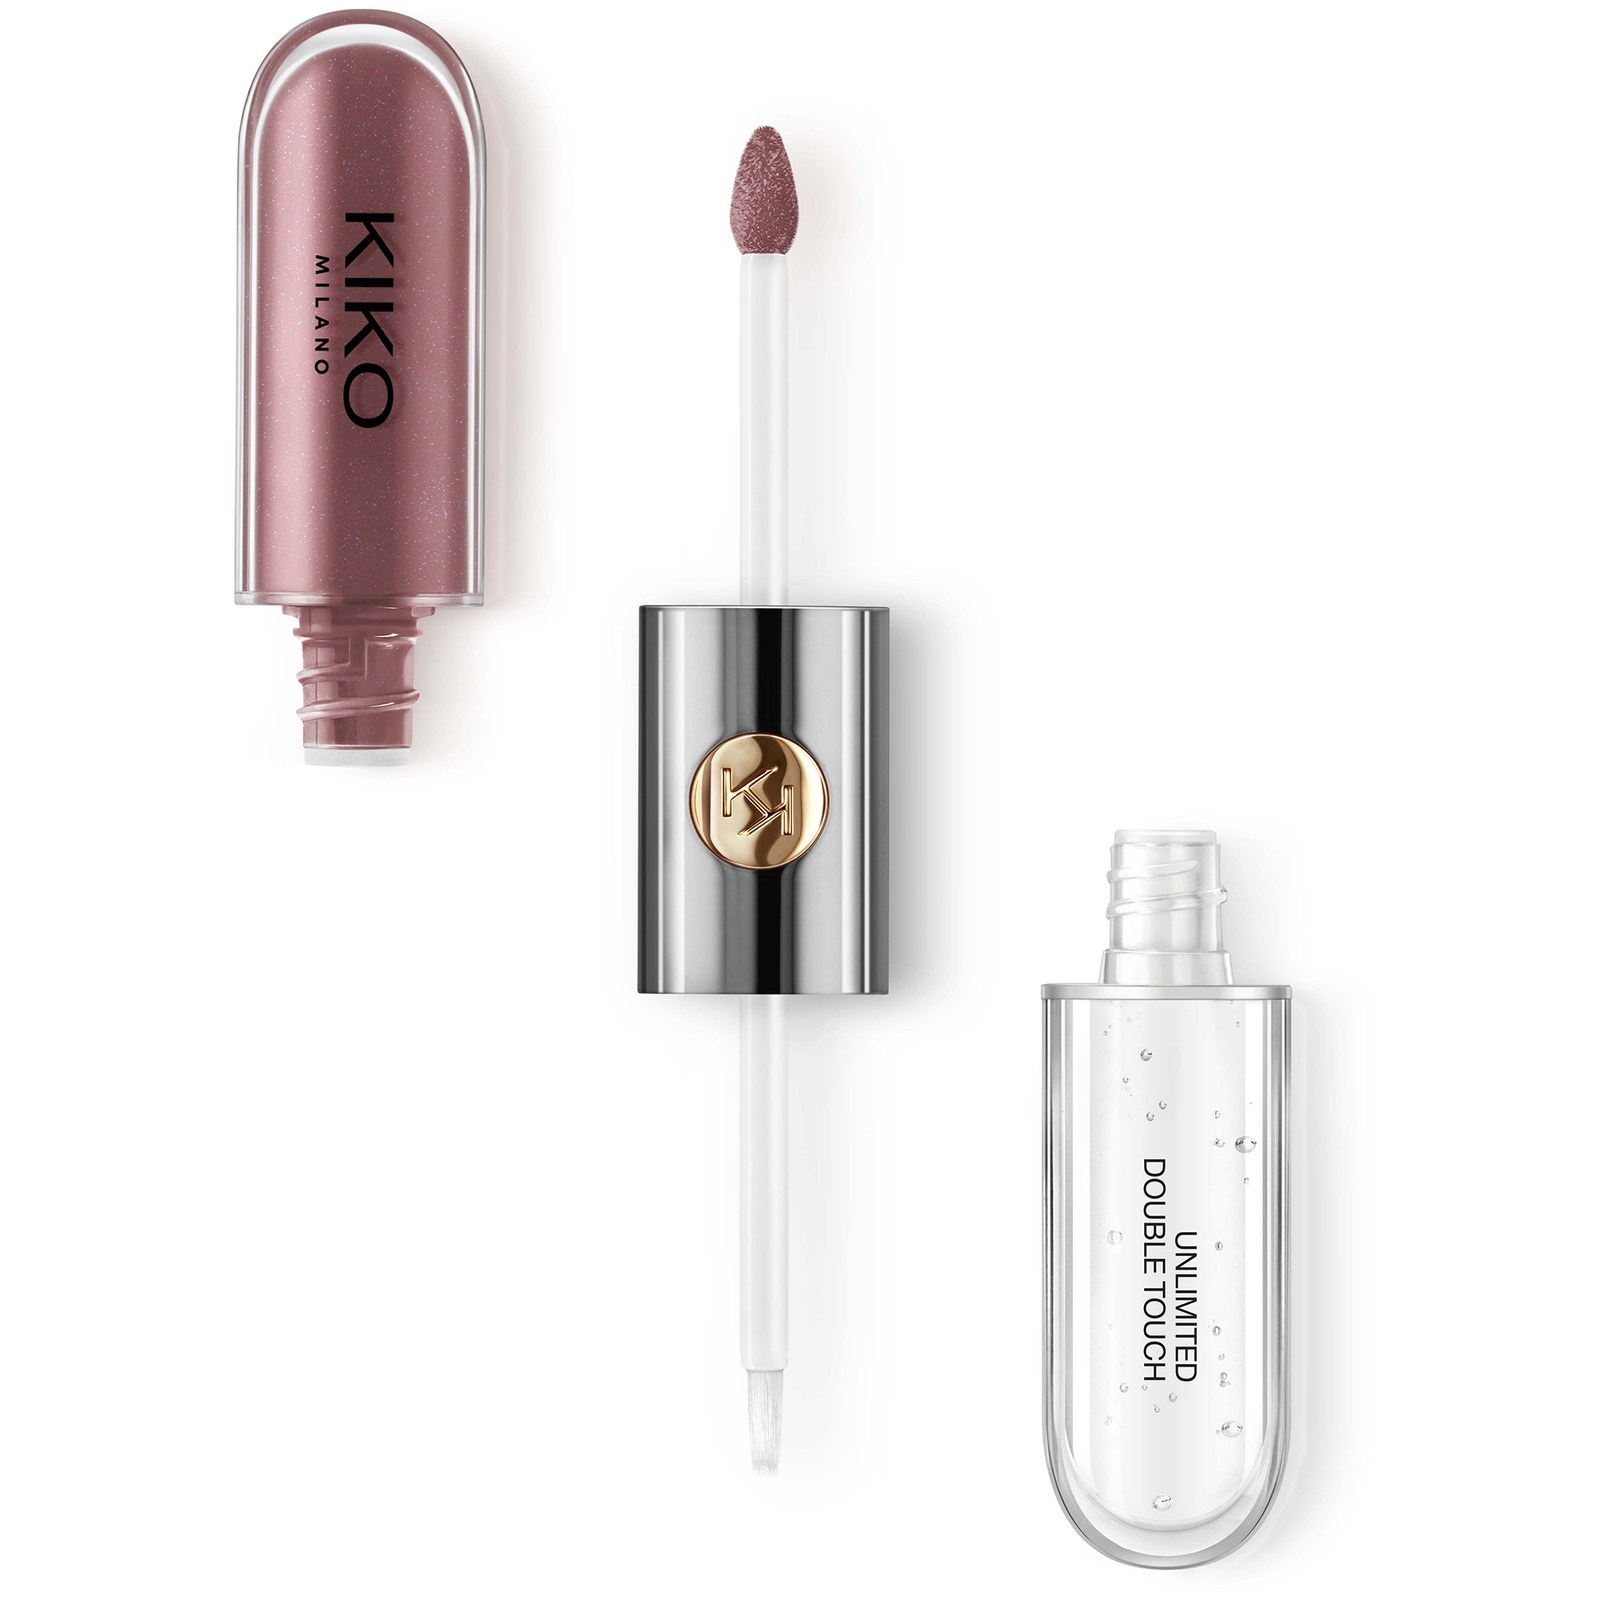 KIKO Milano Unlimited Double Touch 6ml (Various Shades) - 121 Dark Rosy Chestnut